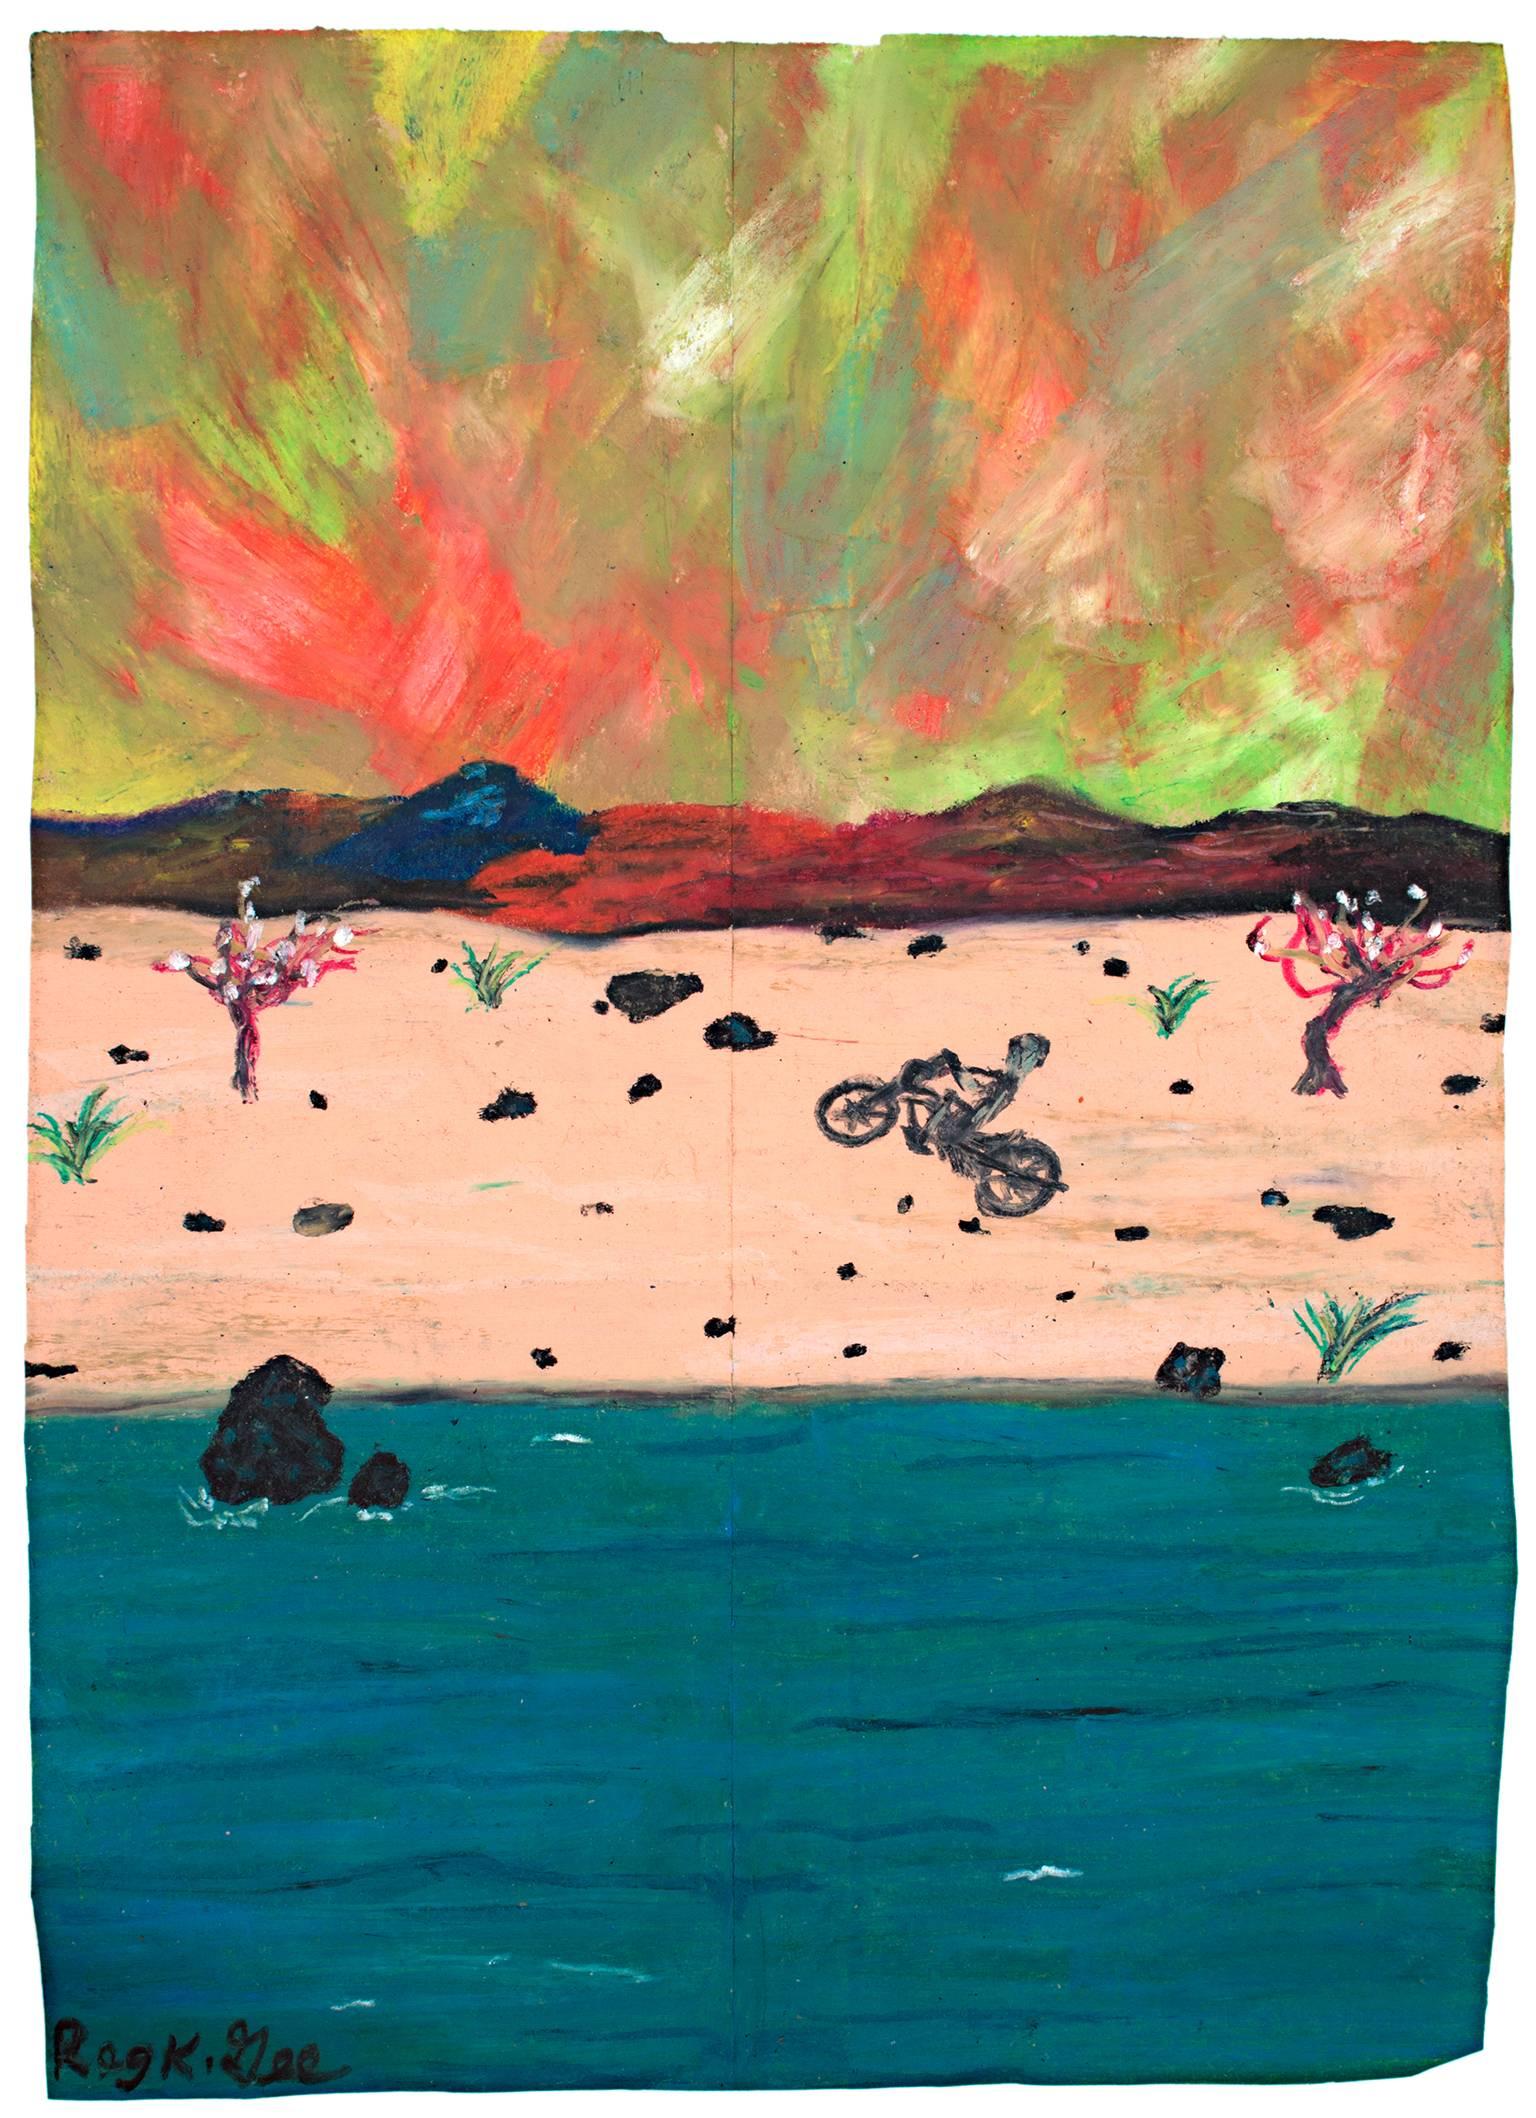 "Whew!" is an original oil pastel drawing on a grocery bag by Reginald K. Gee. The artist signed the piece in the lower left. It depicts a man on a motorcycle doing a wheelie on a beach.

16 3/4" x 12" art
22" x 18" frame
Framed to conservation